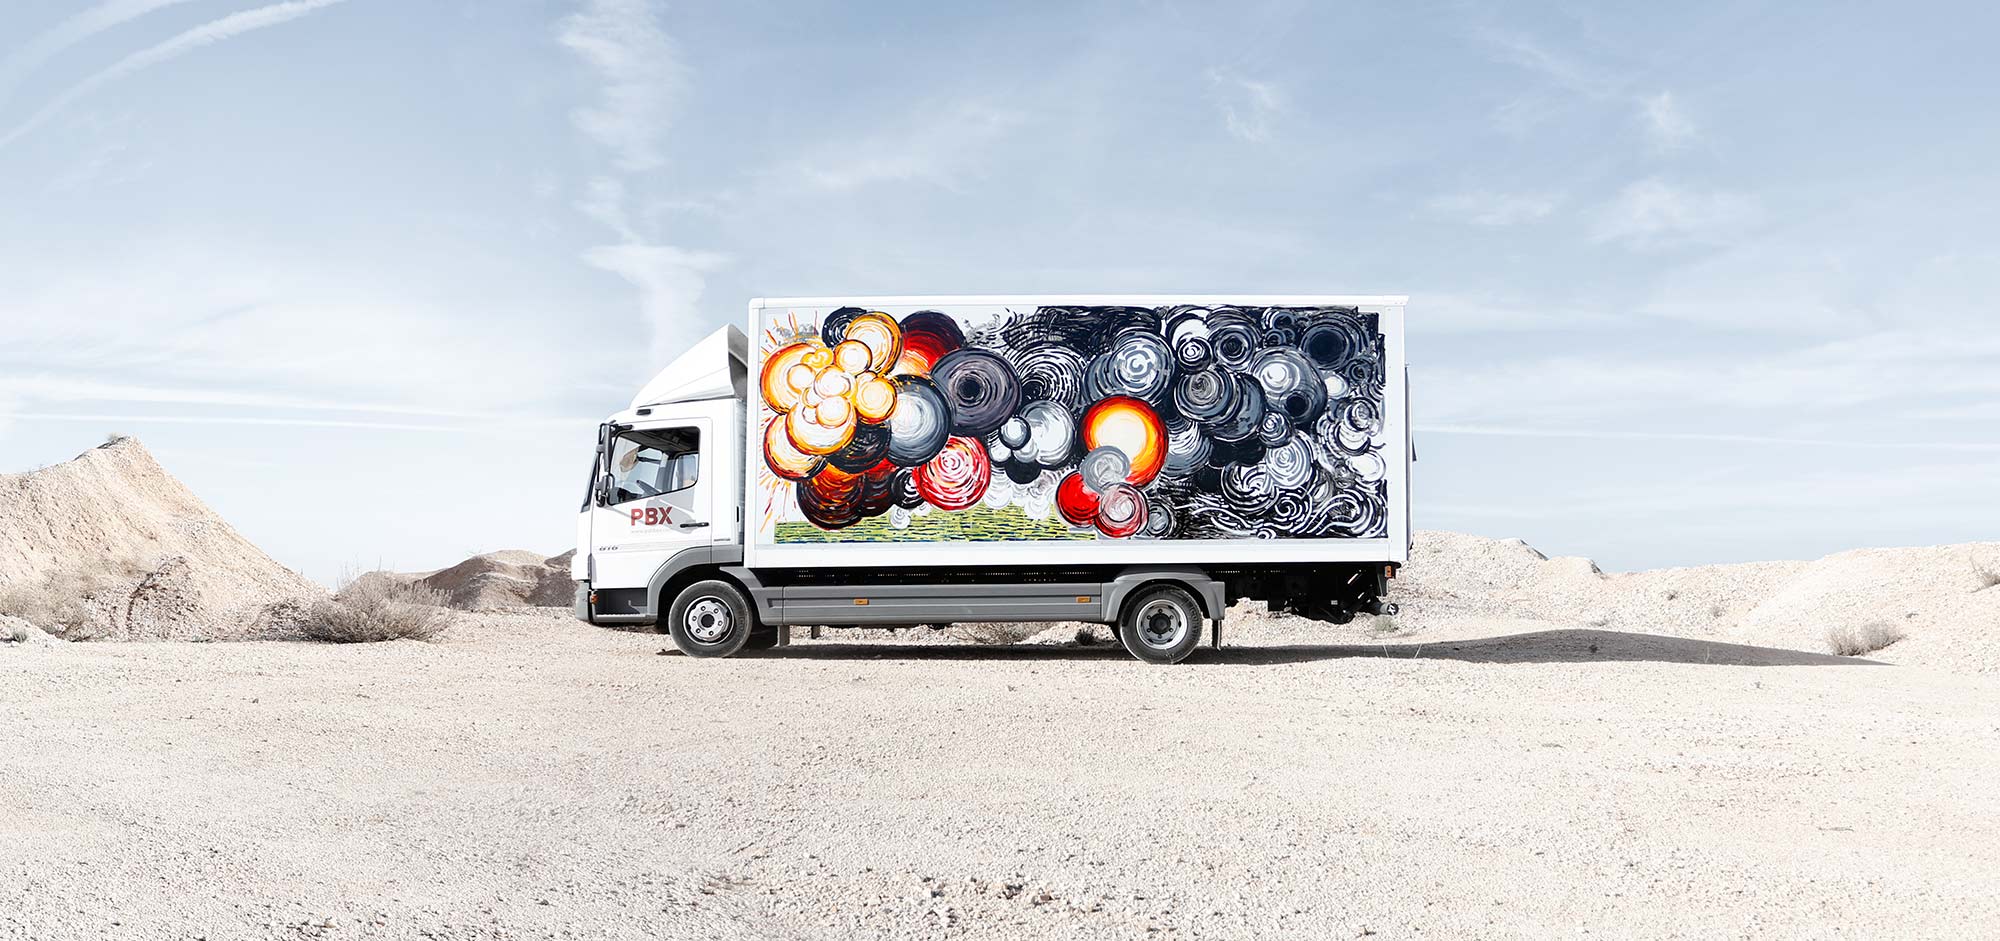 ABRAHAM LACALLE - TRUCK ART PROJECT - 2